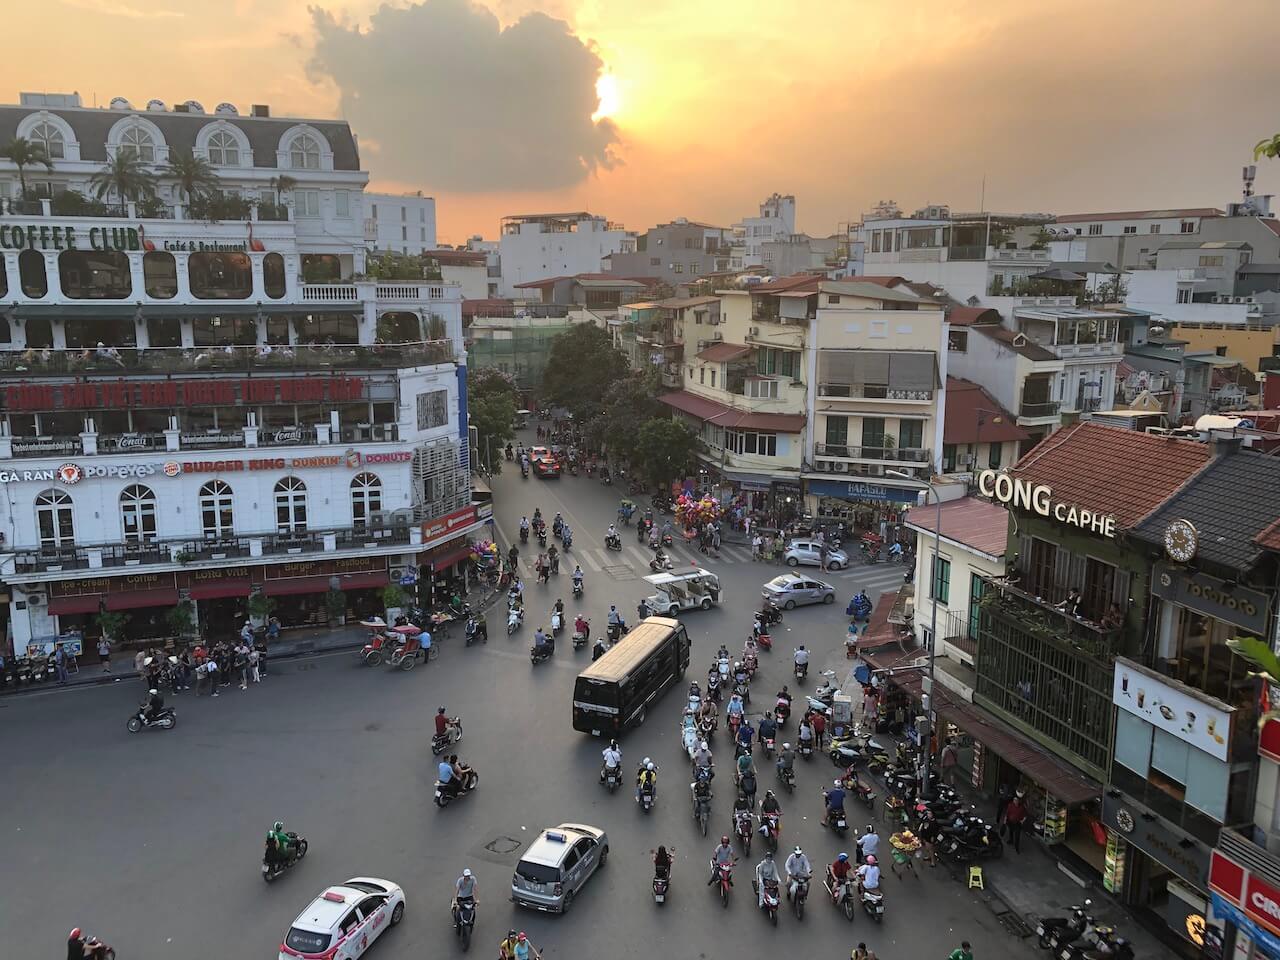 intersection in hanoi at sunset